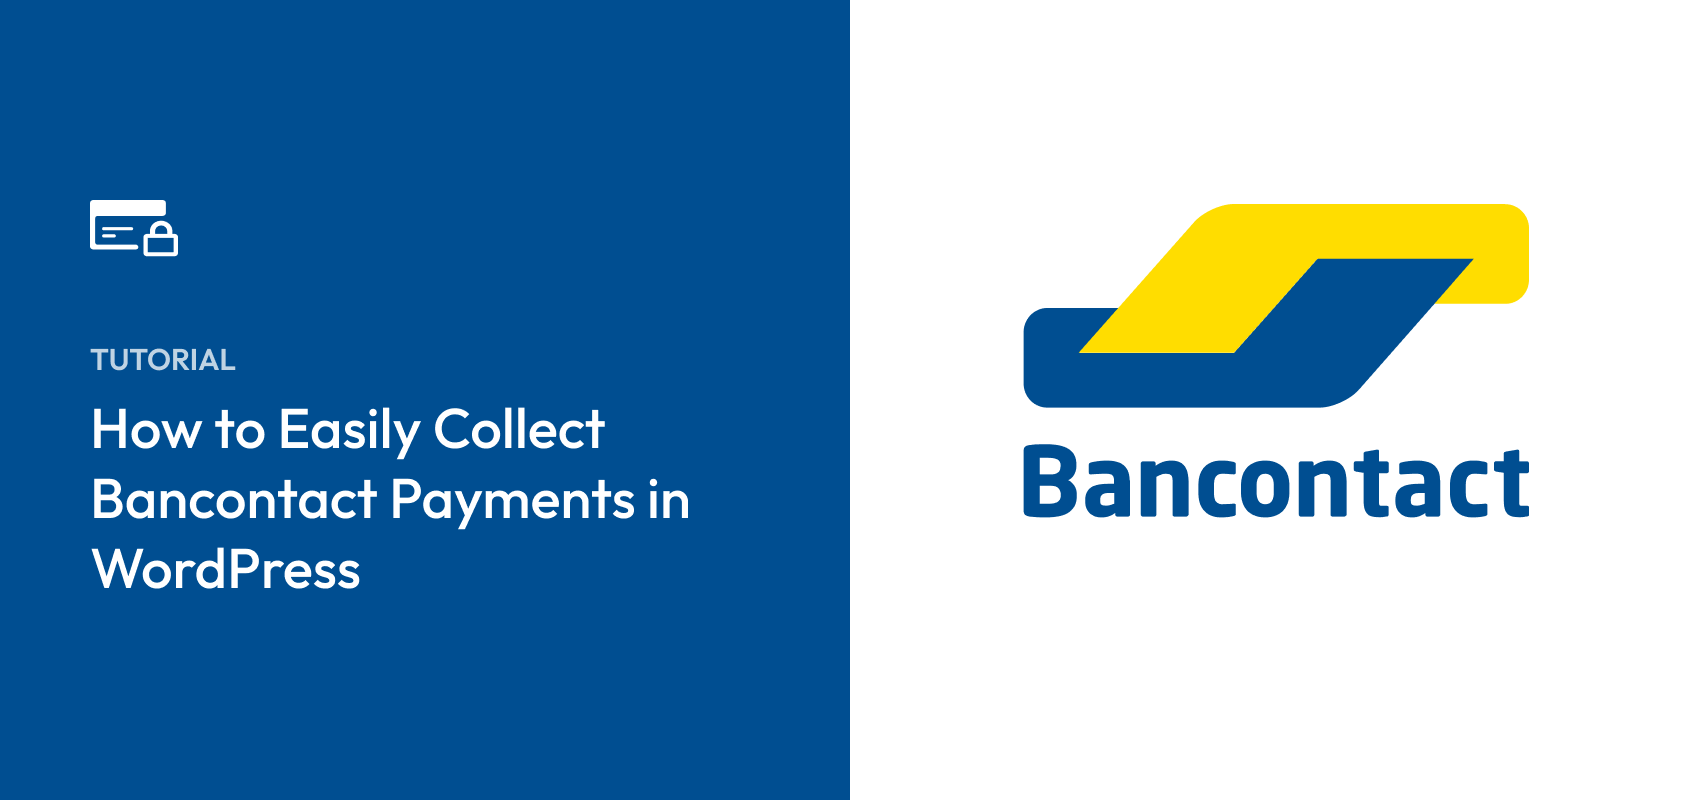 How to Easily Collect Bancontact Payments in WordPress